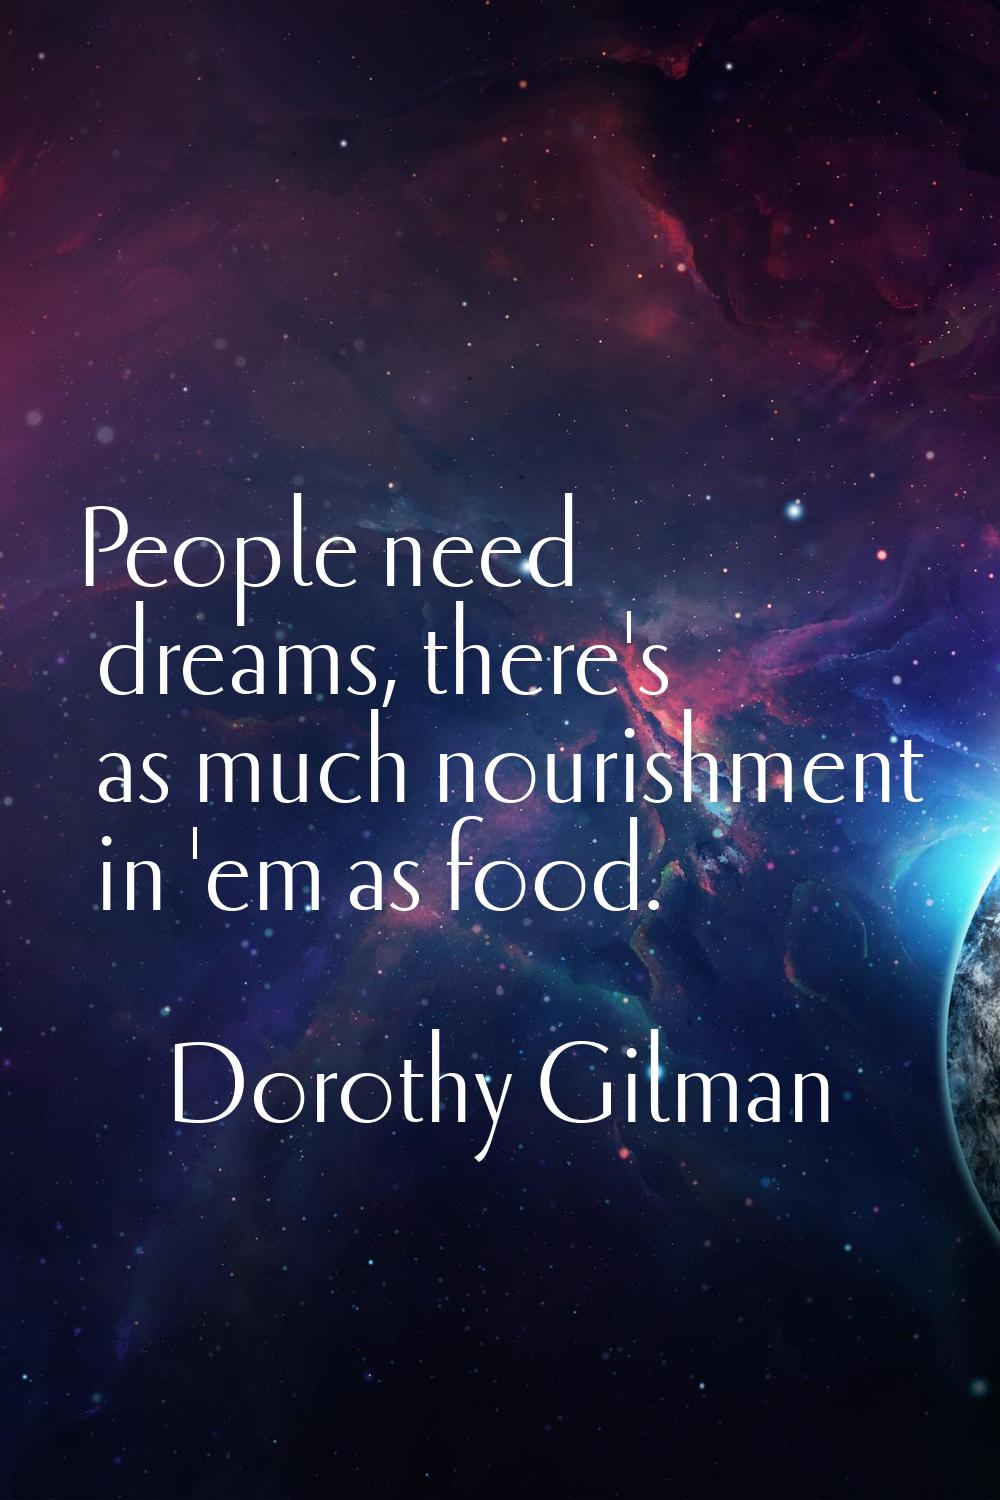 People need dreams, there's as much nourishment in 'em as food.